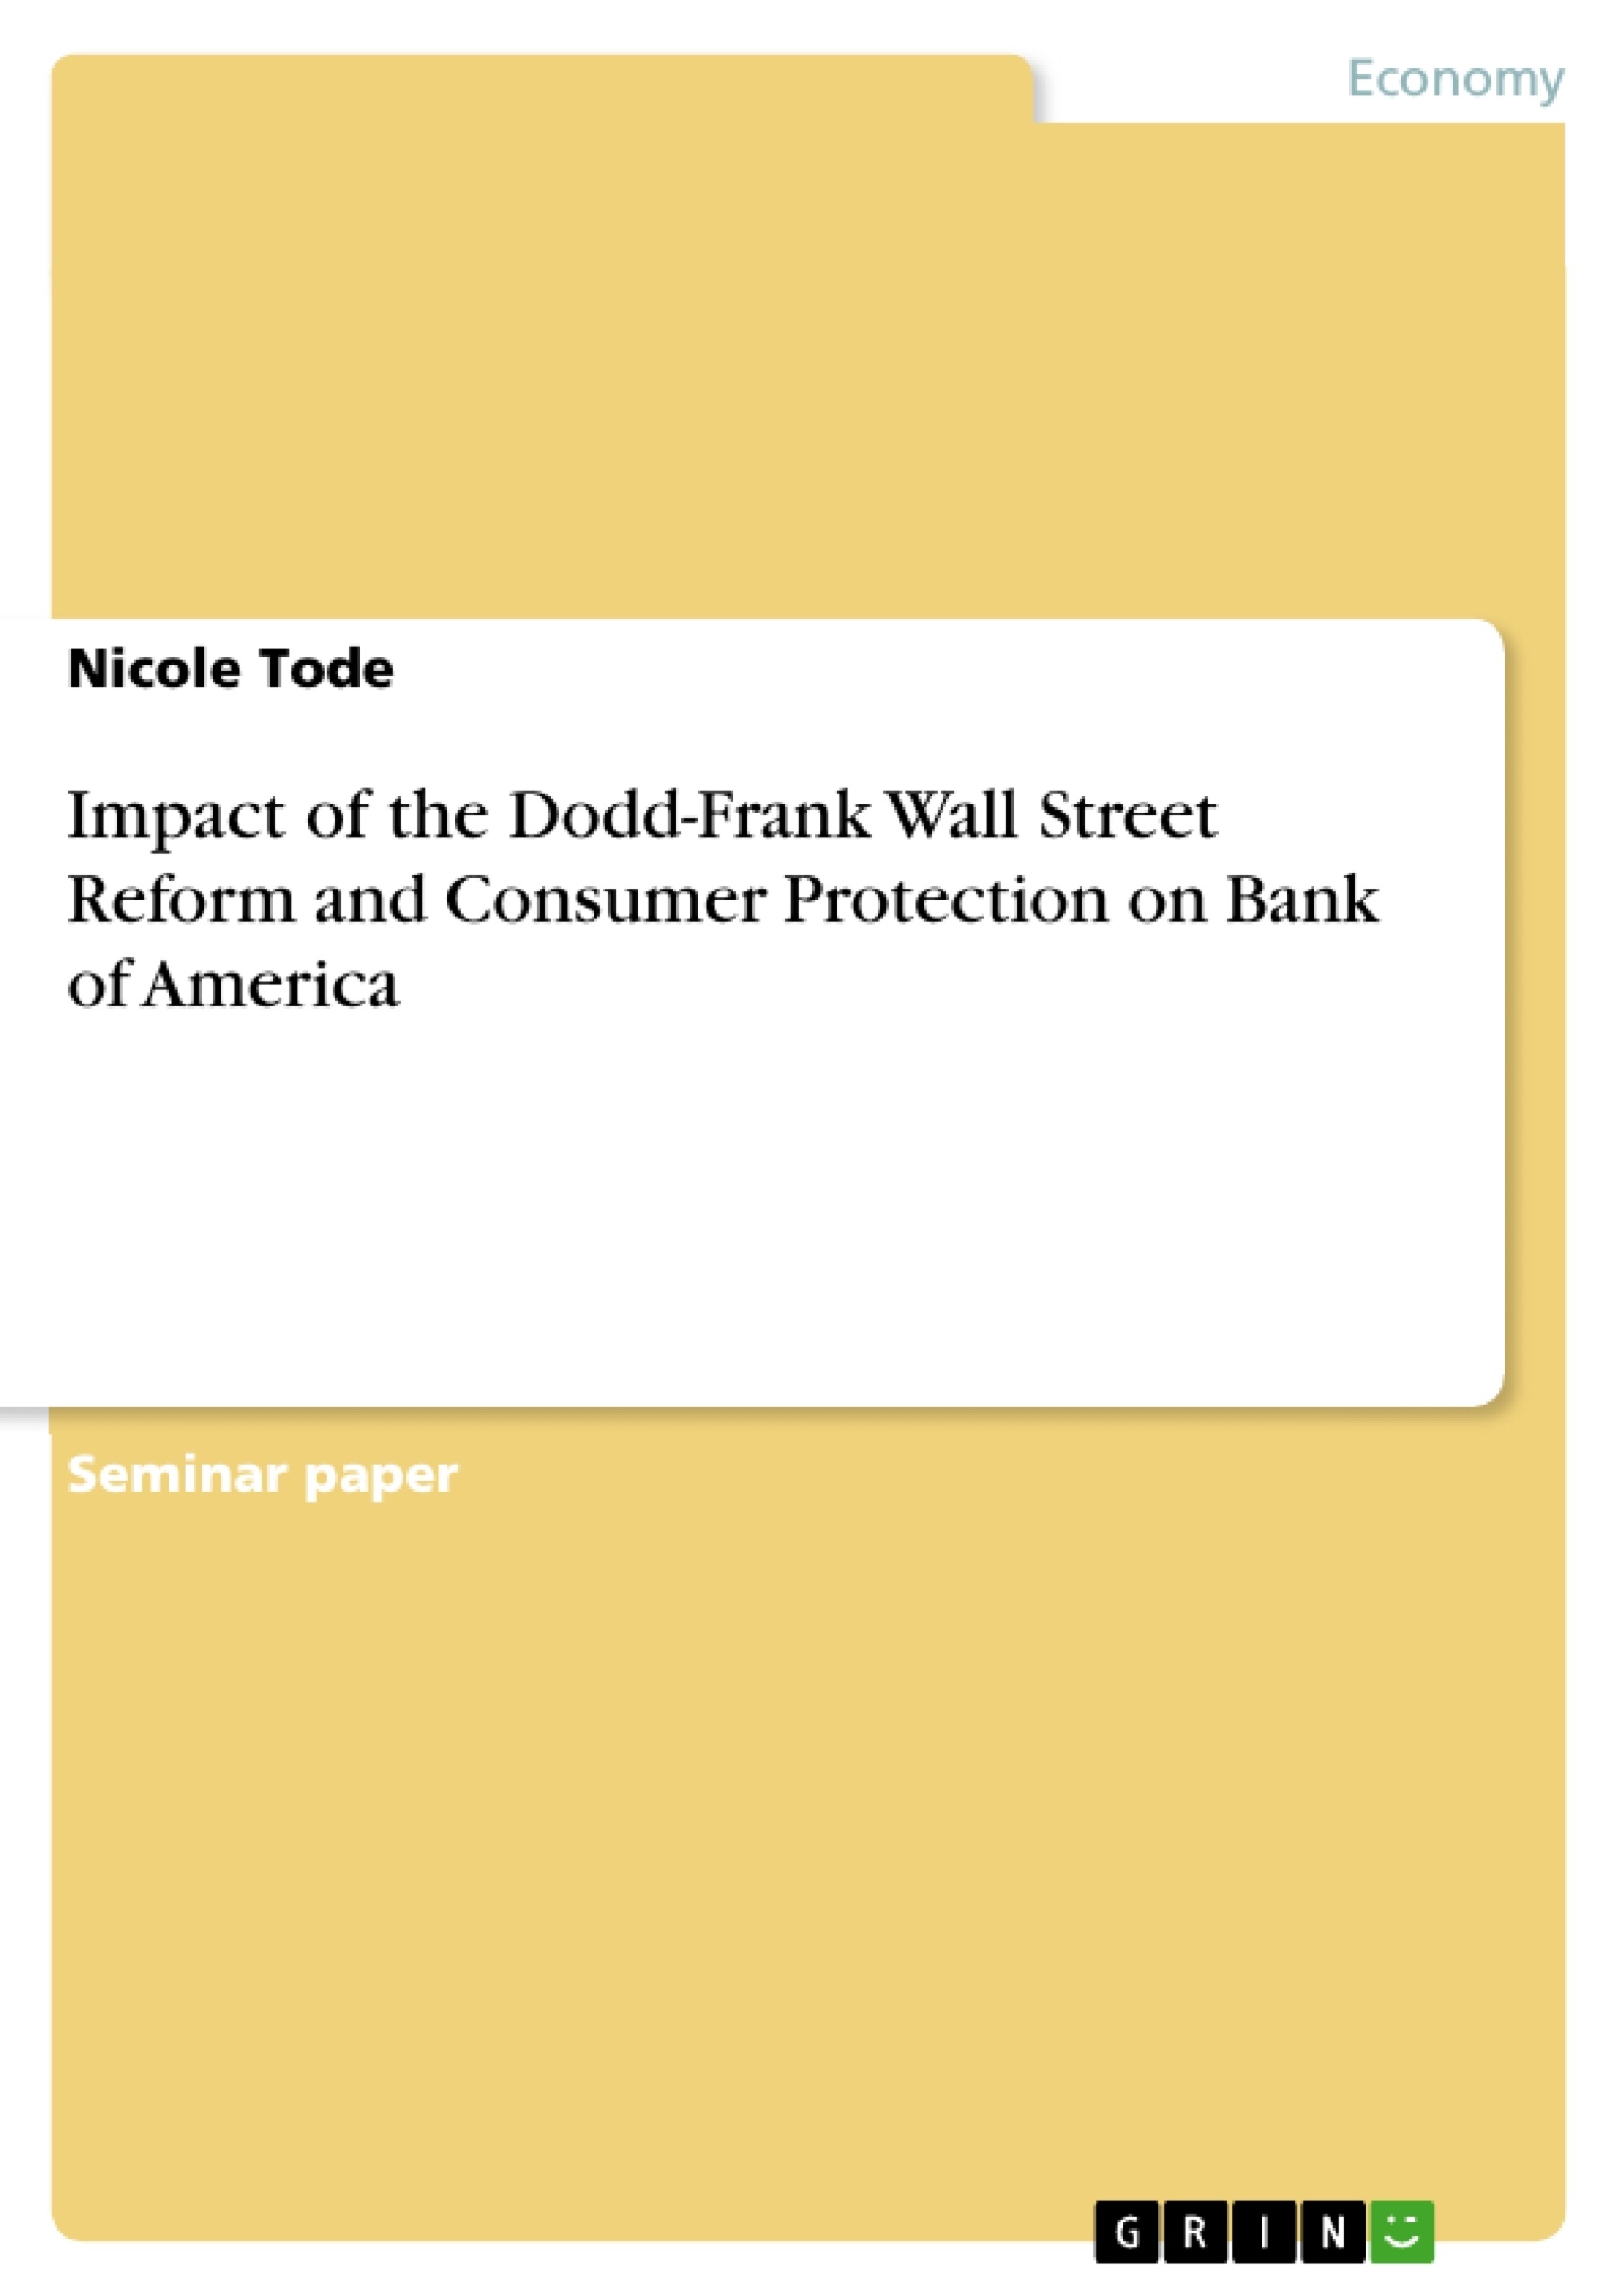 Title: Impact of the Dodd-Frank Wall Street Reform and Consumer Protection on Bank of America